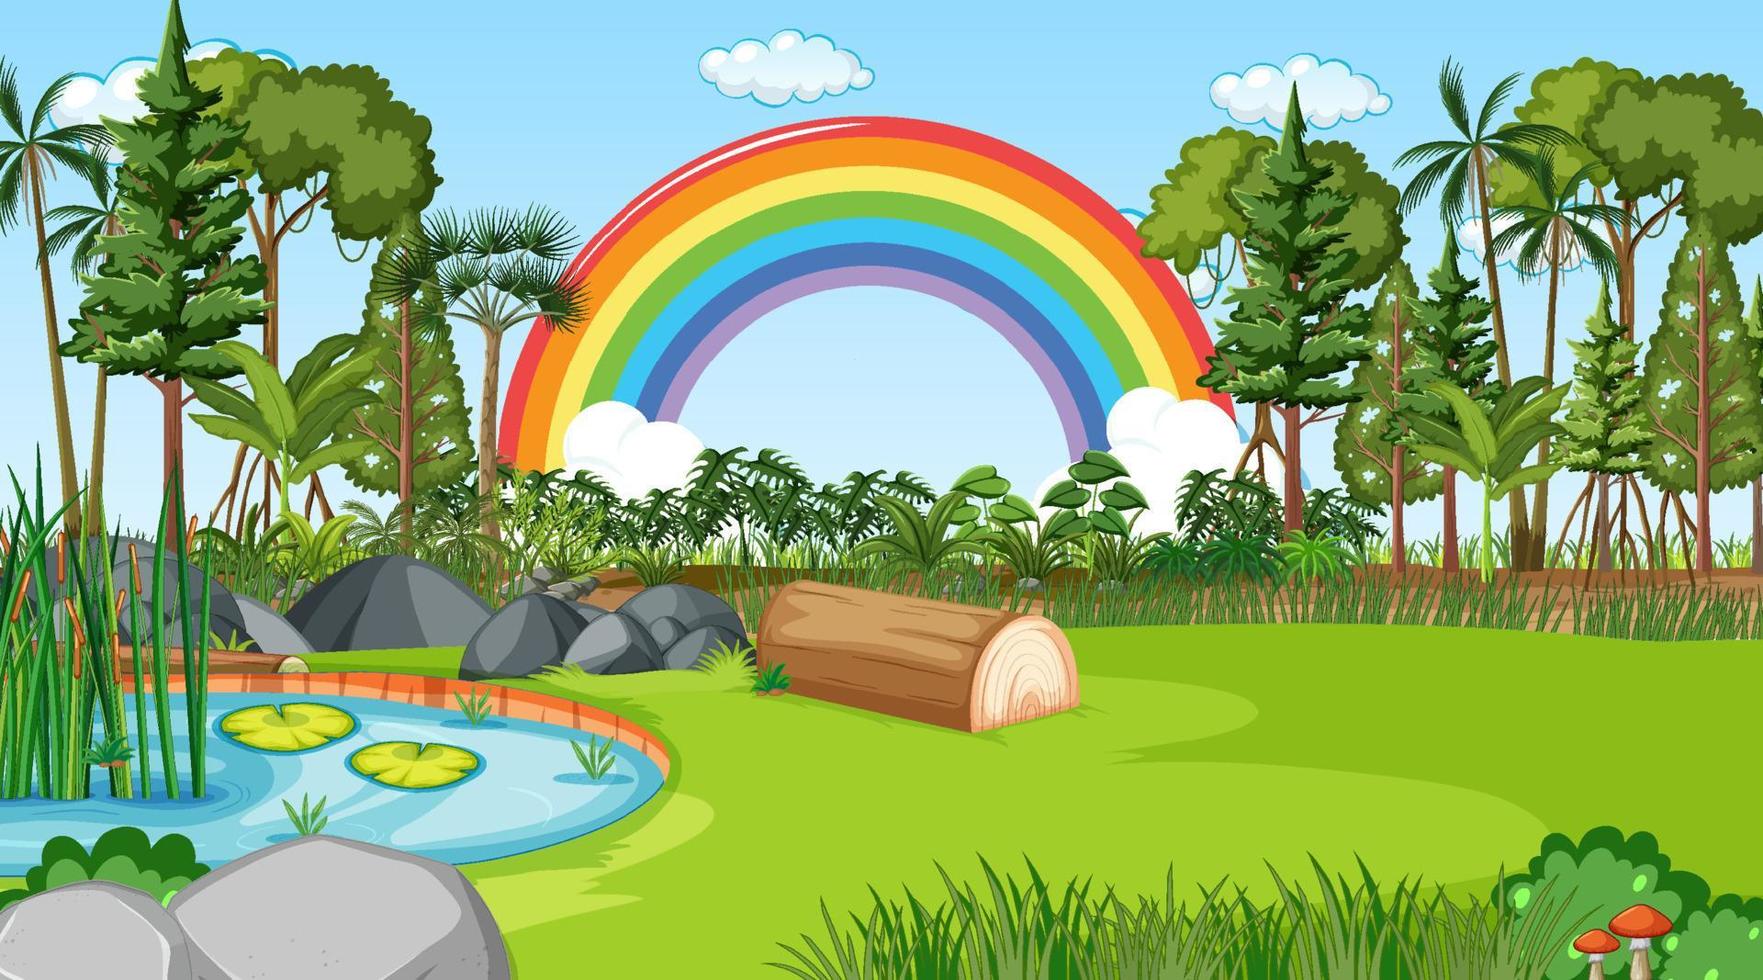 Nature scene background with rainbow in the sky vector